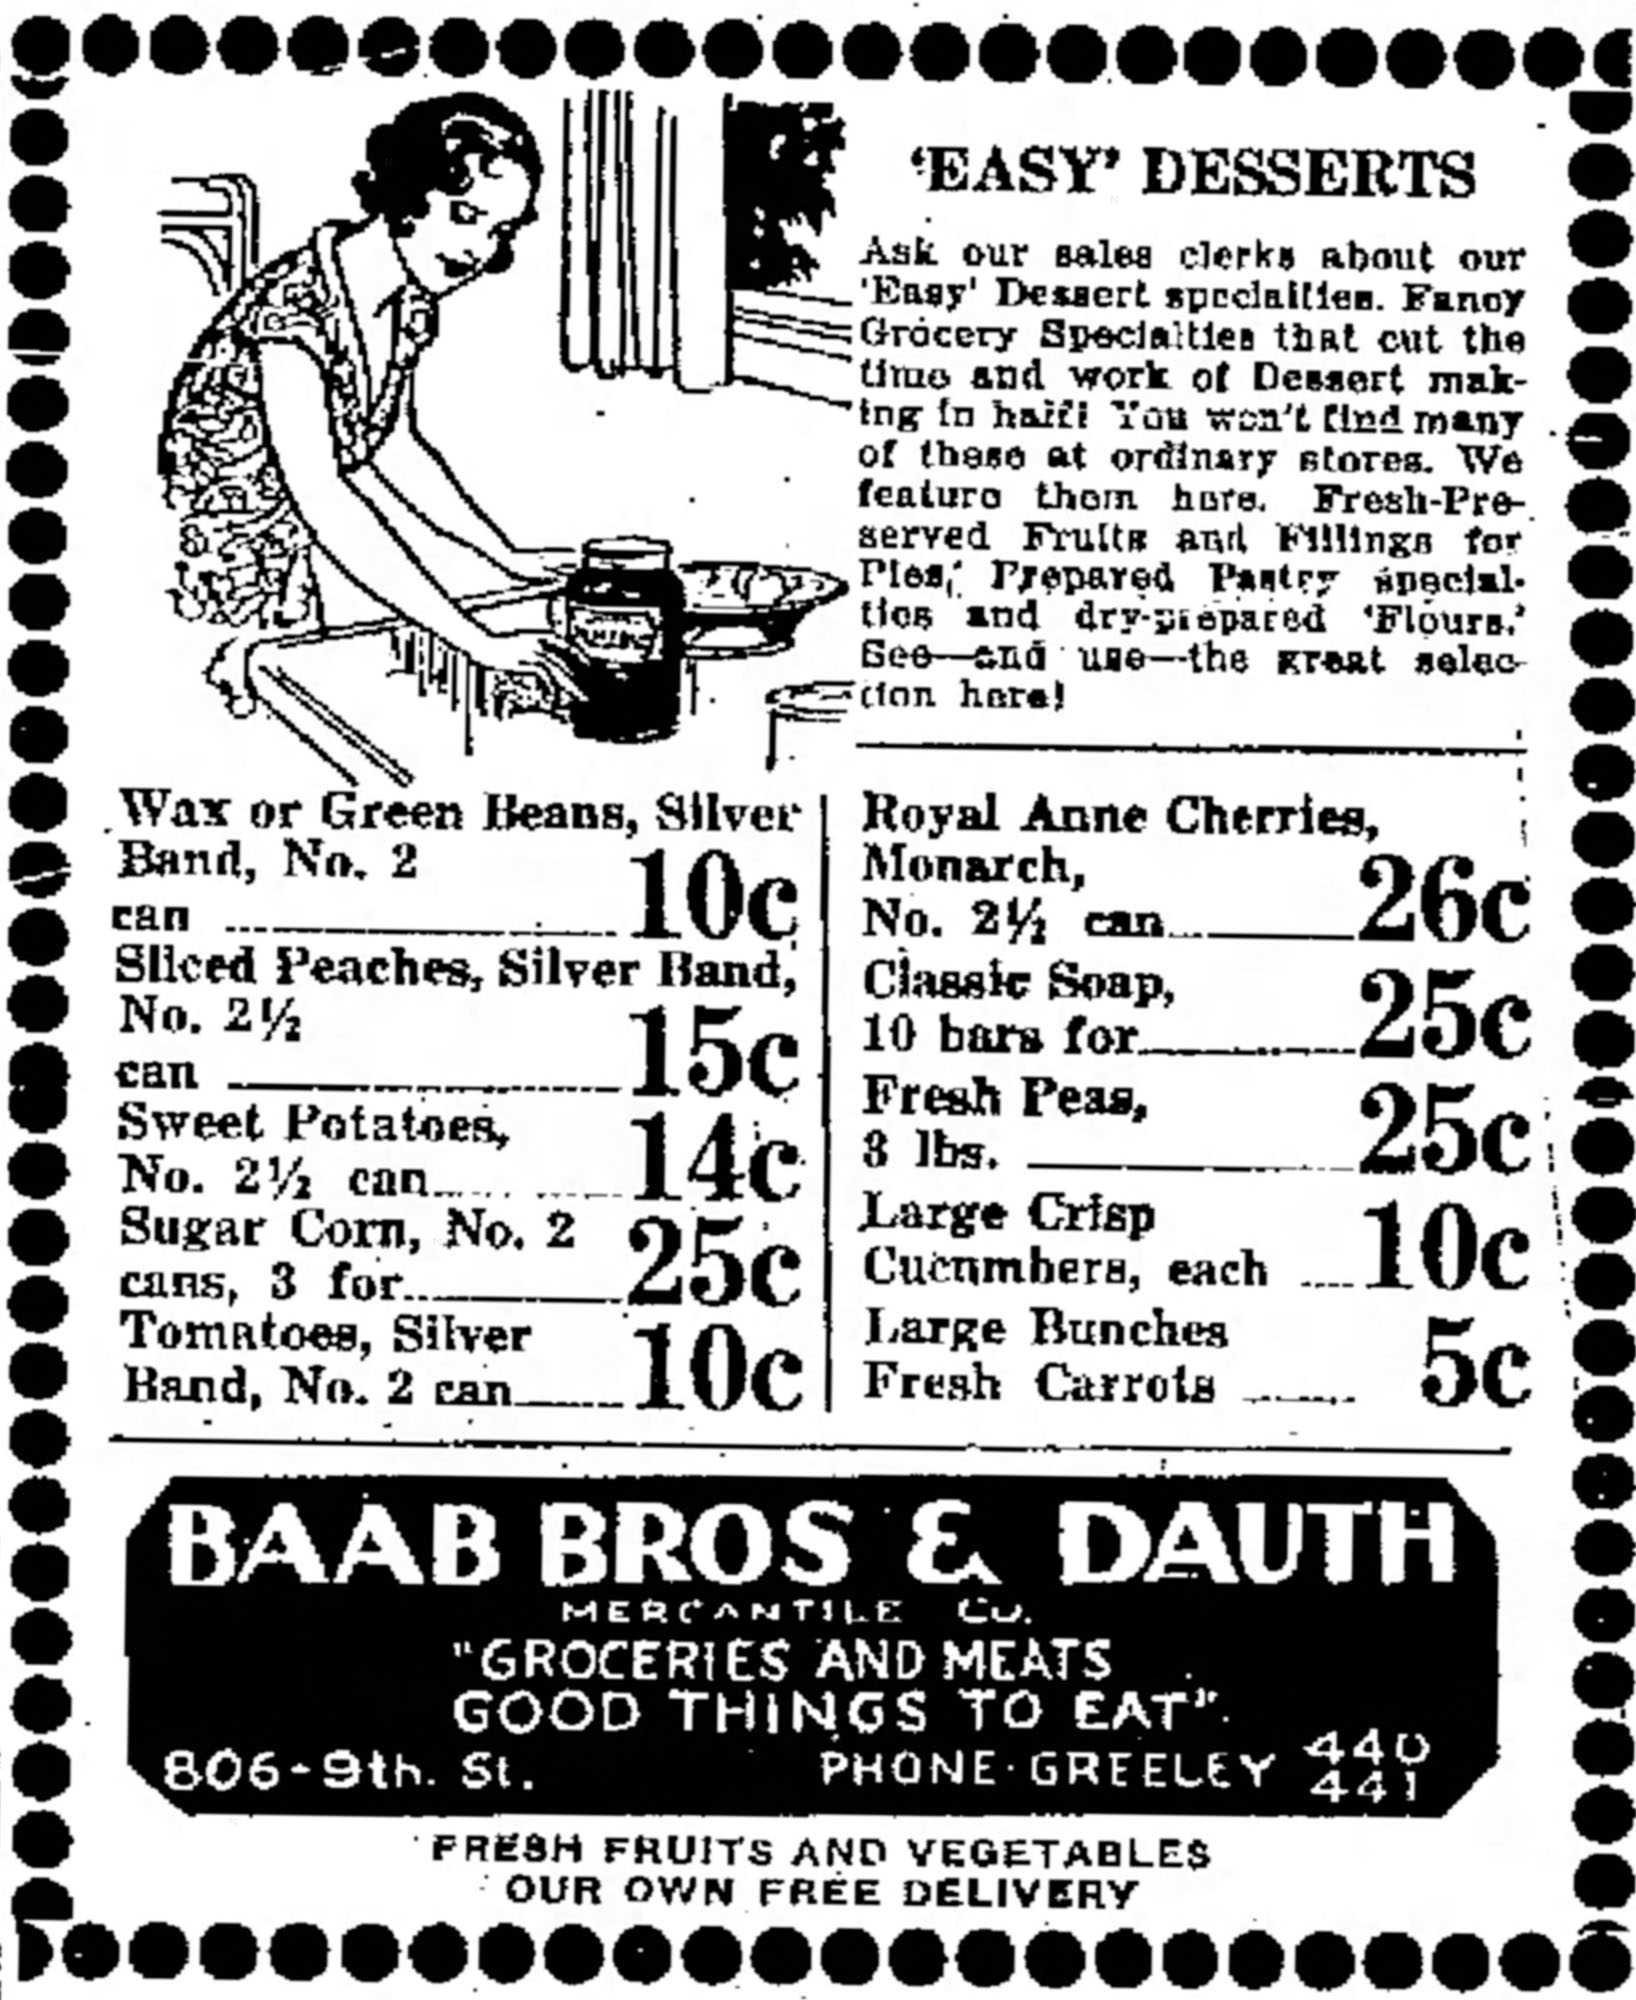 Dauth Family Archive - 1933-06-02 - Greeley Daily Tribune - Baab Bros and Dauth Advertisement